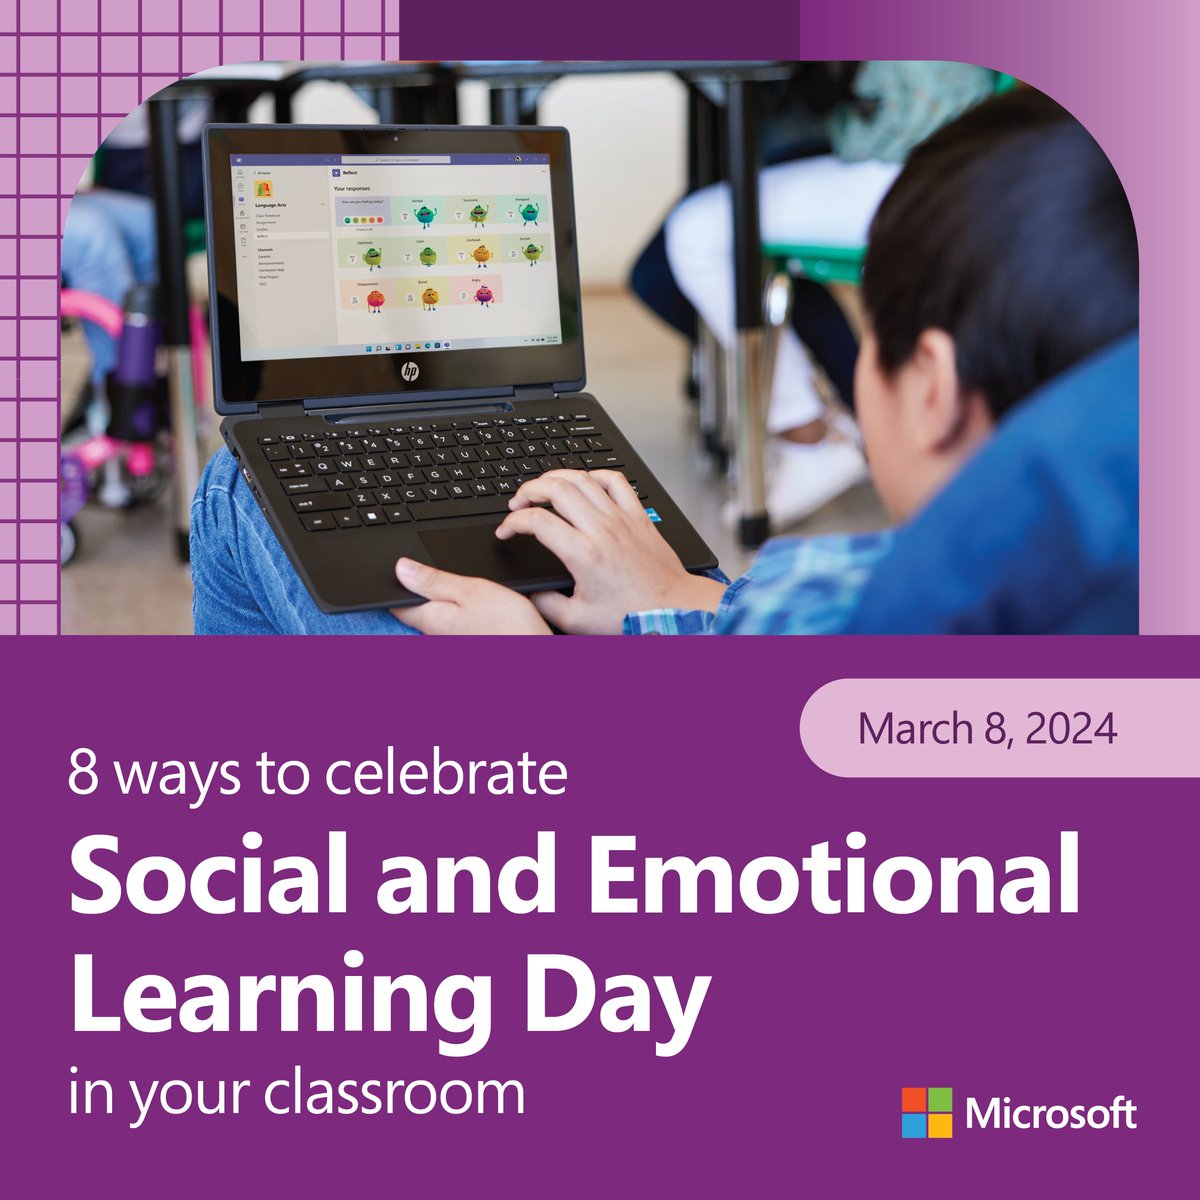 Social and emotional learning helps students boost academic achievement, develop critical life skills, and build positive relationships. Discover how you can put positive well-being to practice in your classroom: msft.it/6016cjwWq #MicrosoftEDU #SELDay